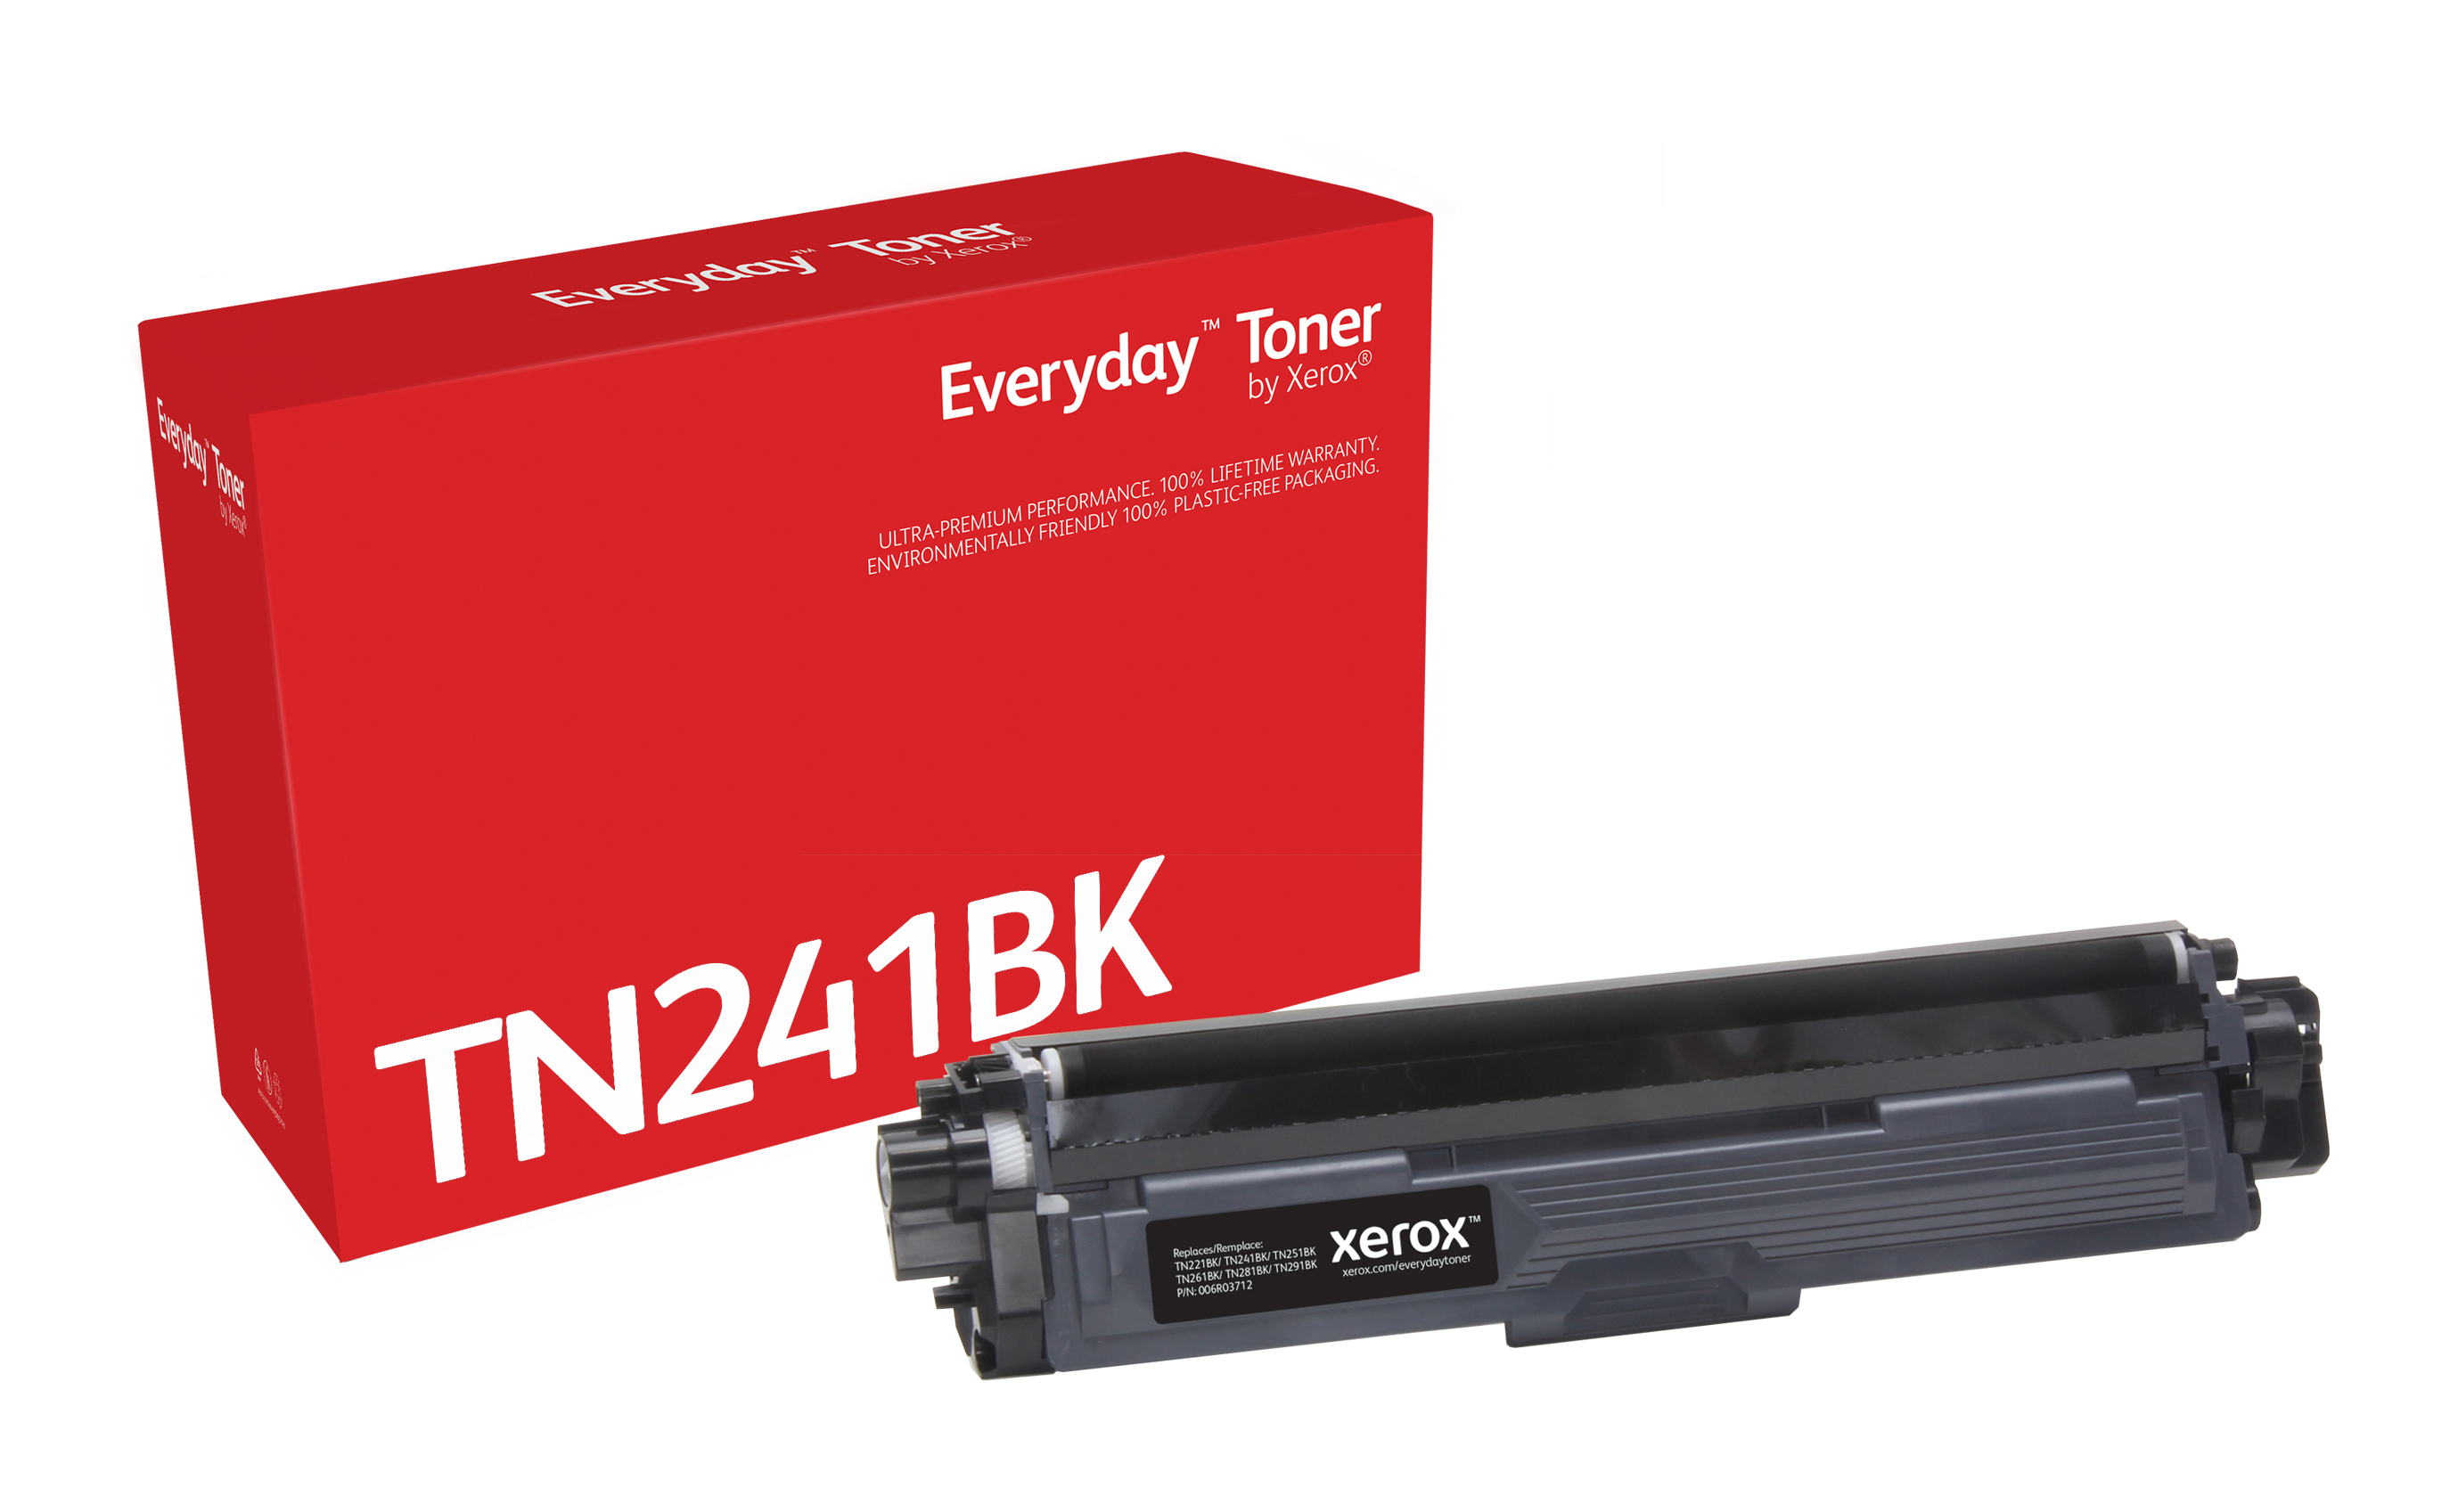 Slip sko smør laser Everyday Black Toner compatible with Brother TN241BK 006R03712 by Xerox